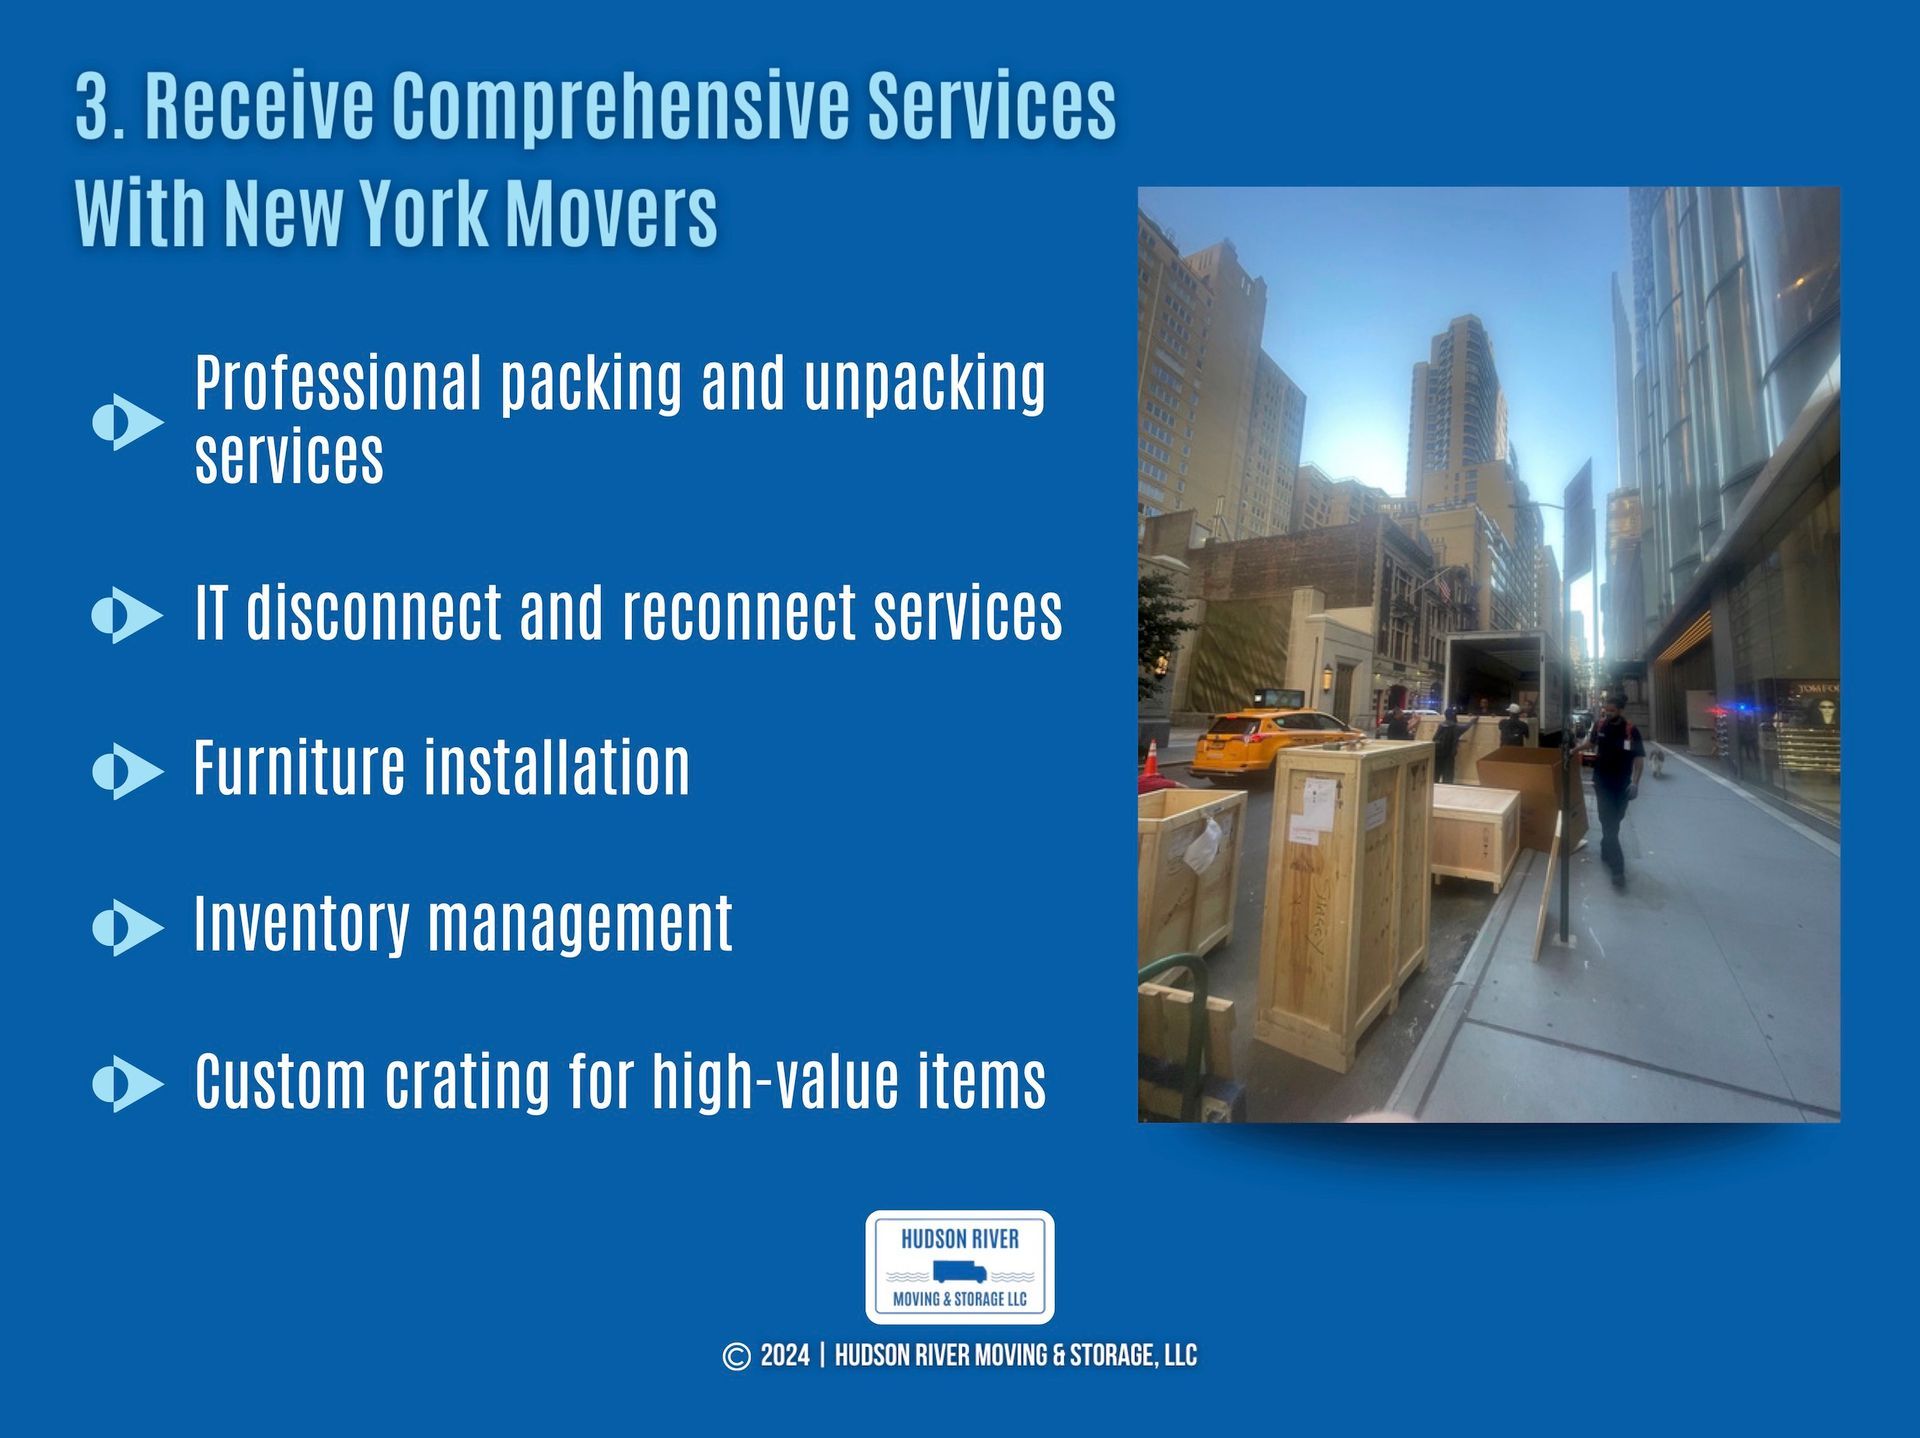 Text details services available at Hudson River Moving & Storage, by an image of the team on the NYC side walk, moving items.